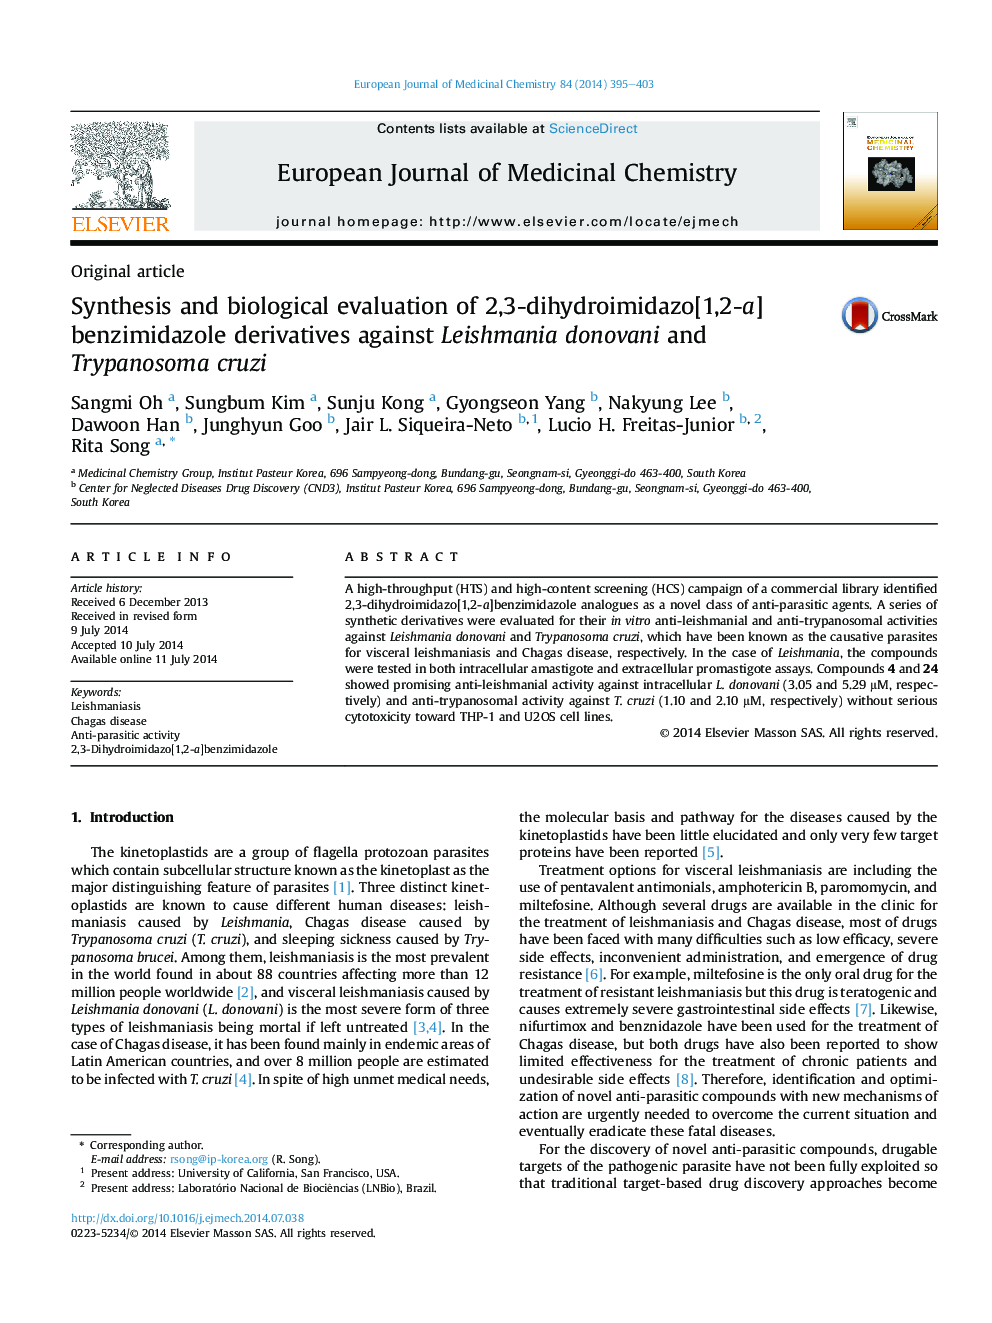 Synthesis and biological evaluation of 2,3-dihydroimidazo[1,2-a]benzimidazole derivatives against Leishmania donovani and Trypanosoma cruzi